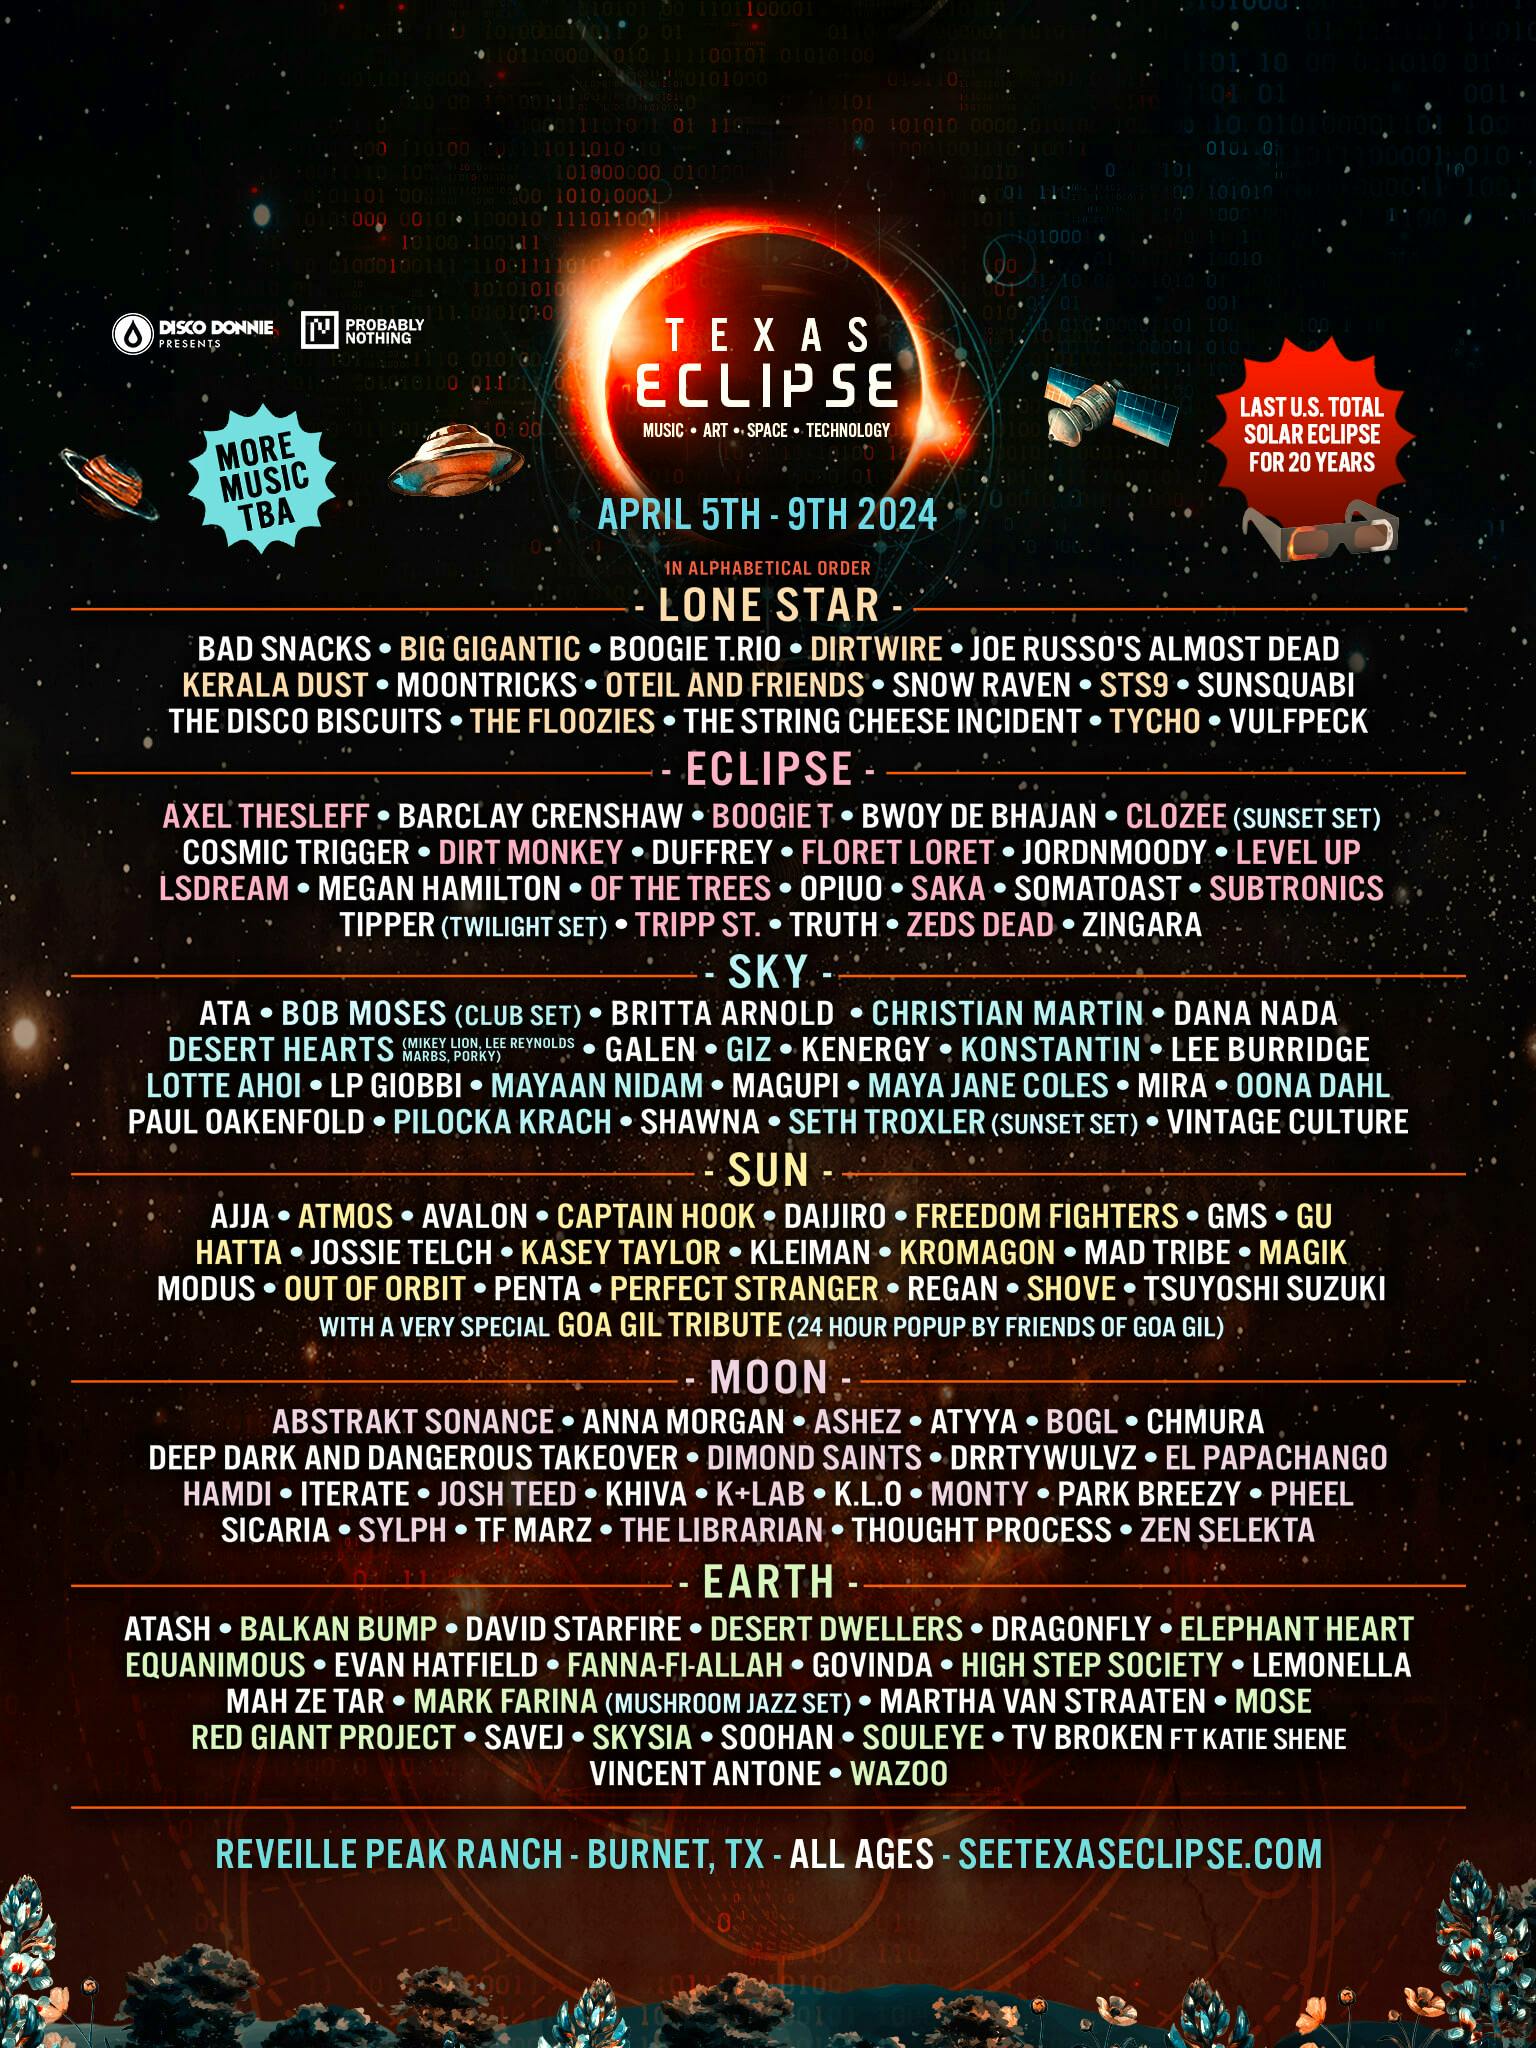 Win VIP Passes to the 2024 Texas Eclipse iHeartRaves